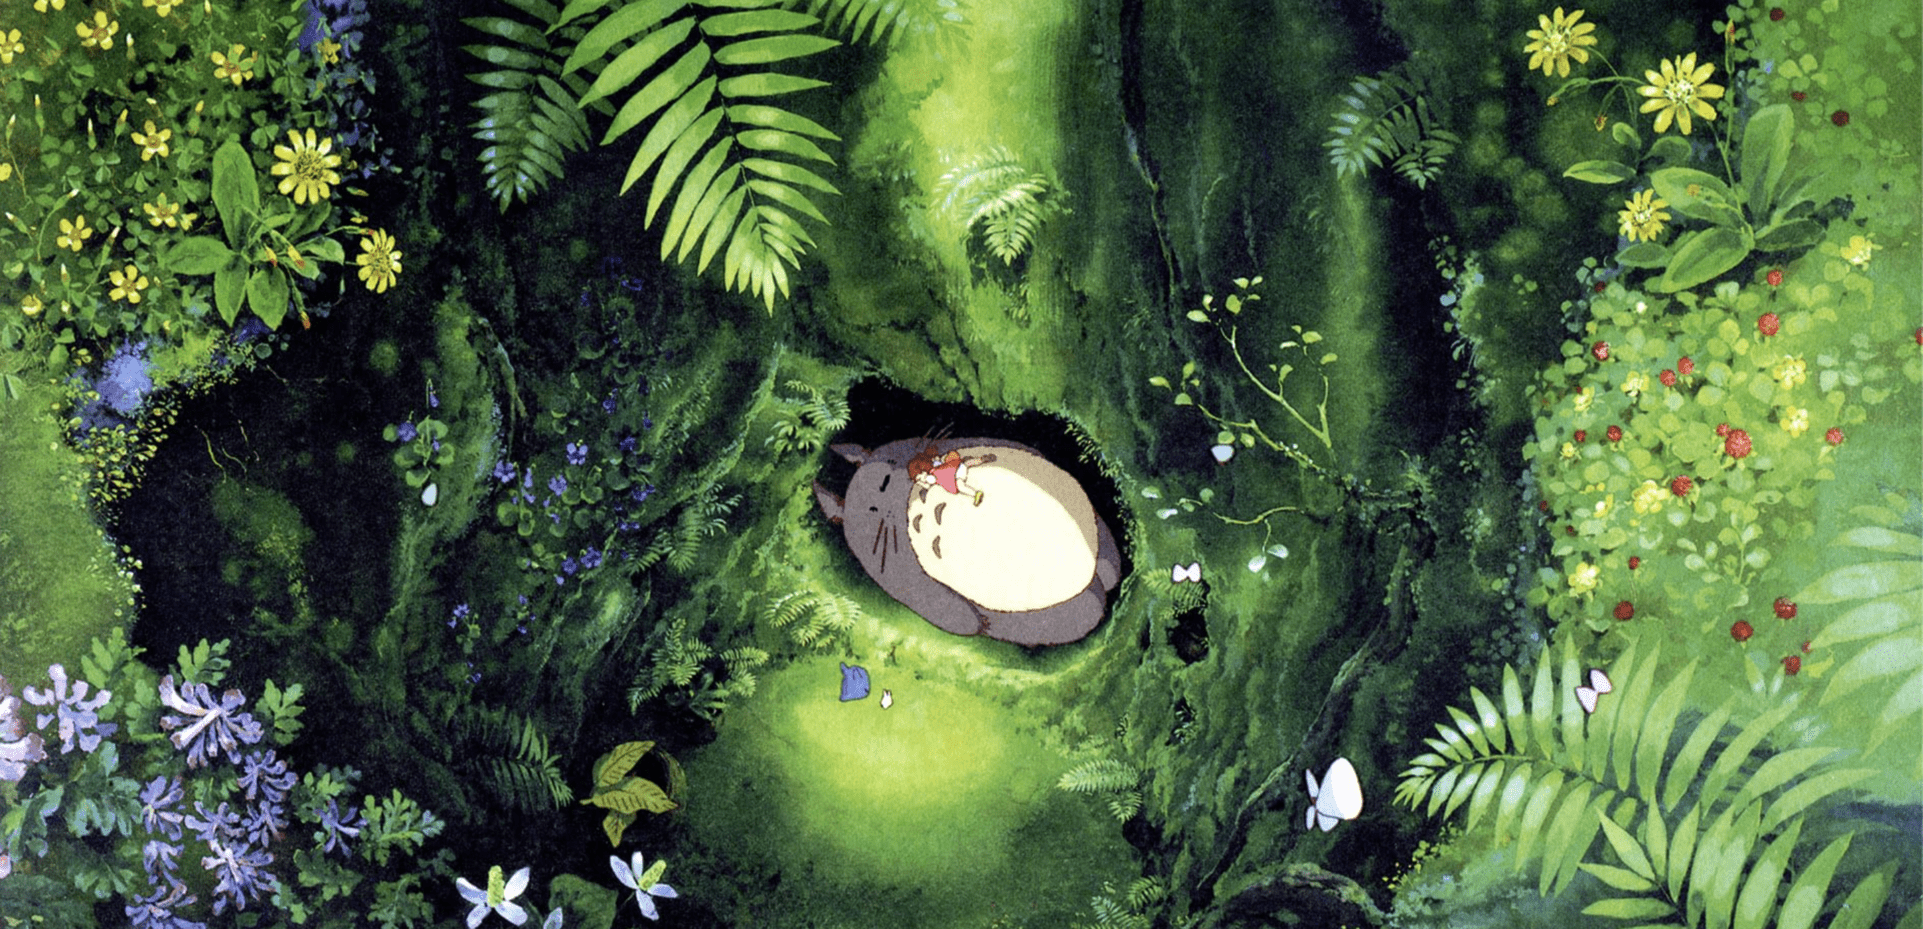 A kid takes a nap on top of a rotund forest spirit in this image from Studio Ghibli.